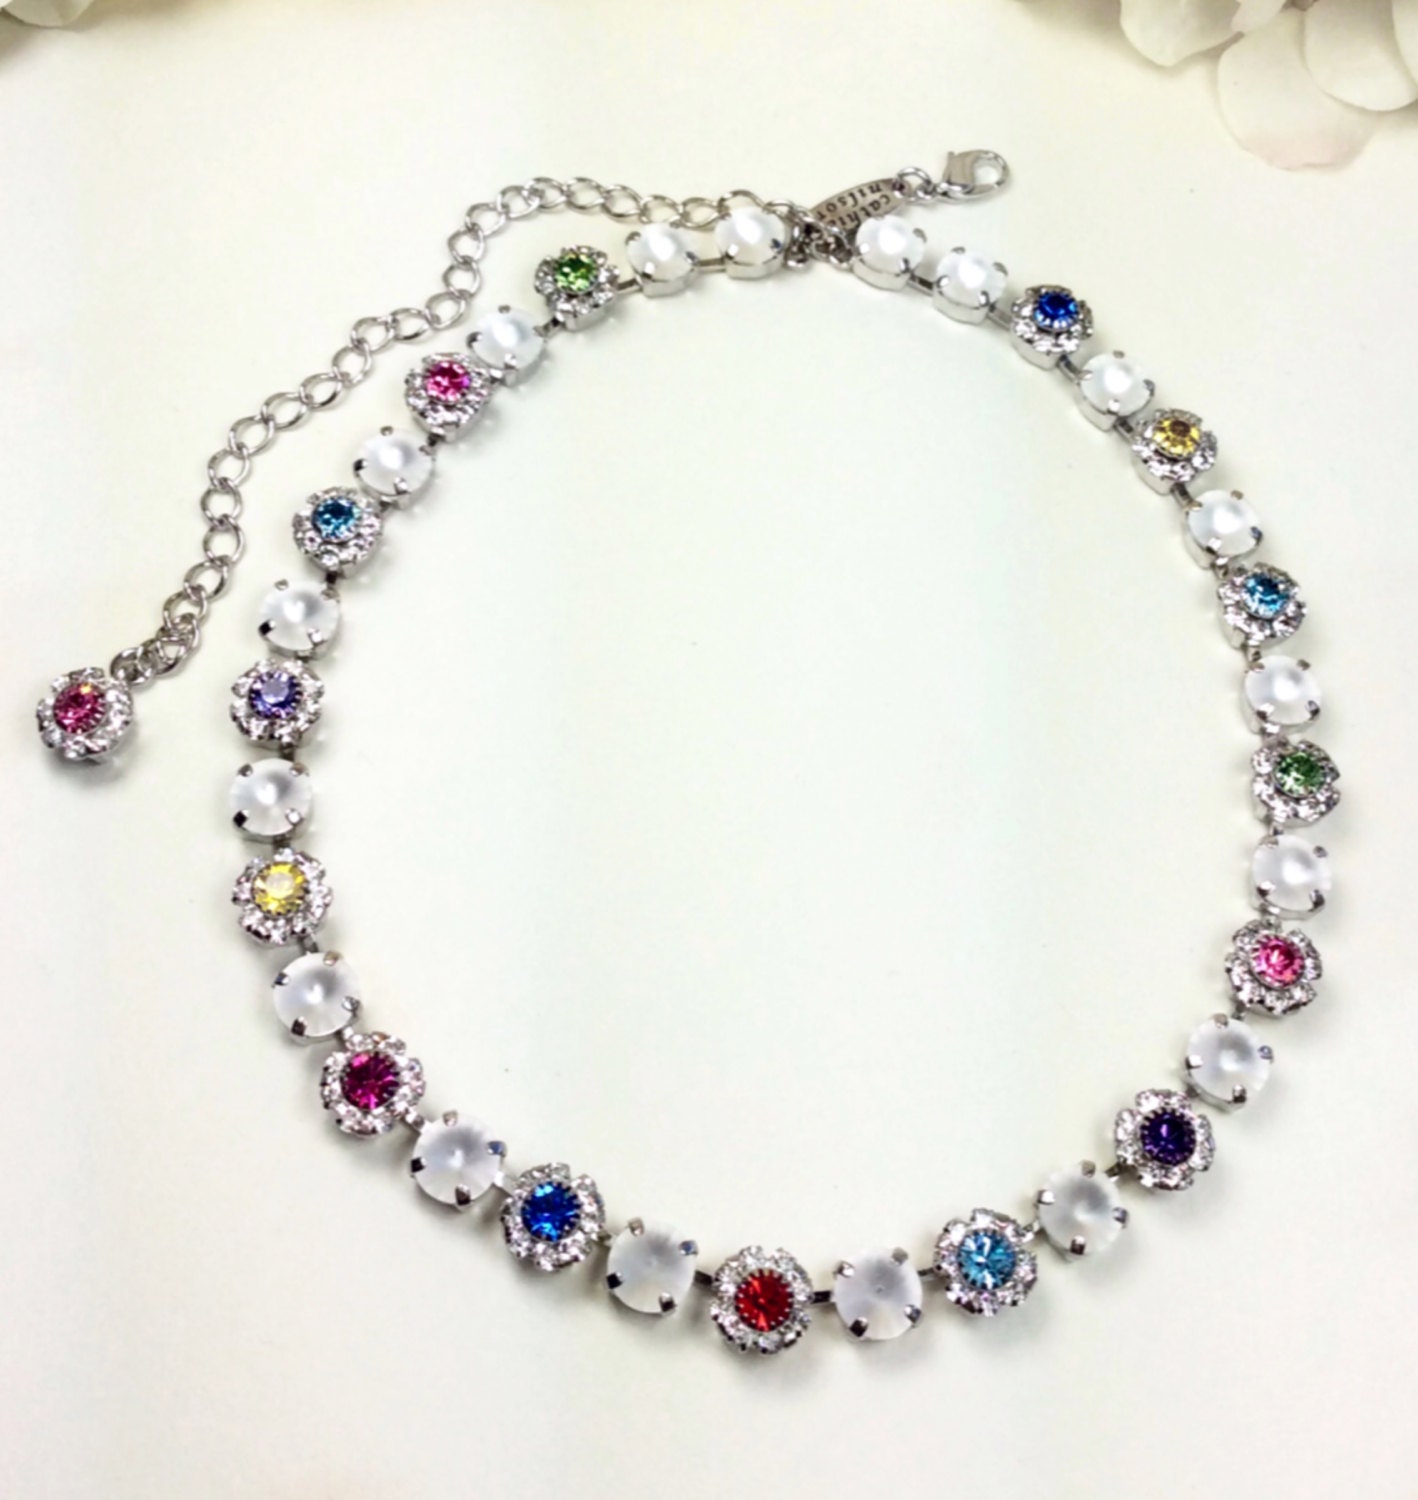 Swarovski Crystal 8.5mm Necklace  "Flower Garden Medley"  Special One Of A Kind - Multi- Colored   -  Feminine Flowers -FREE SHIPPING